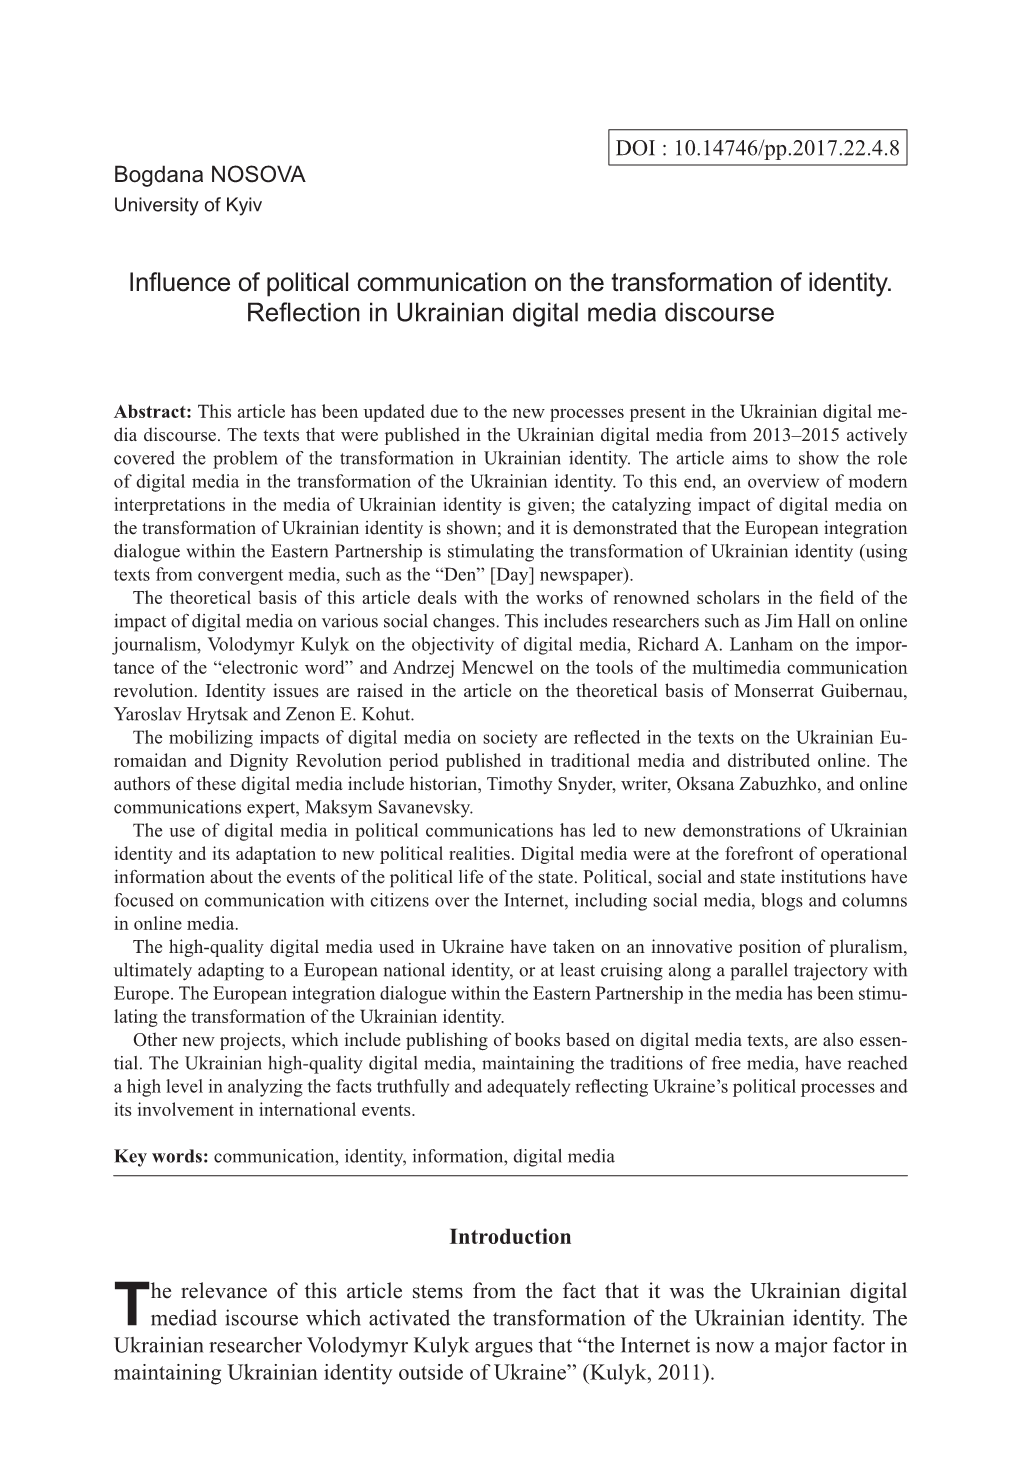 Influence of Political Communication on the Transformation of Identity